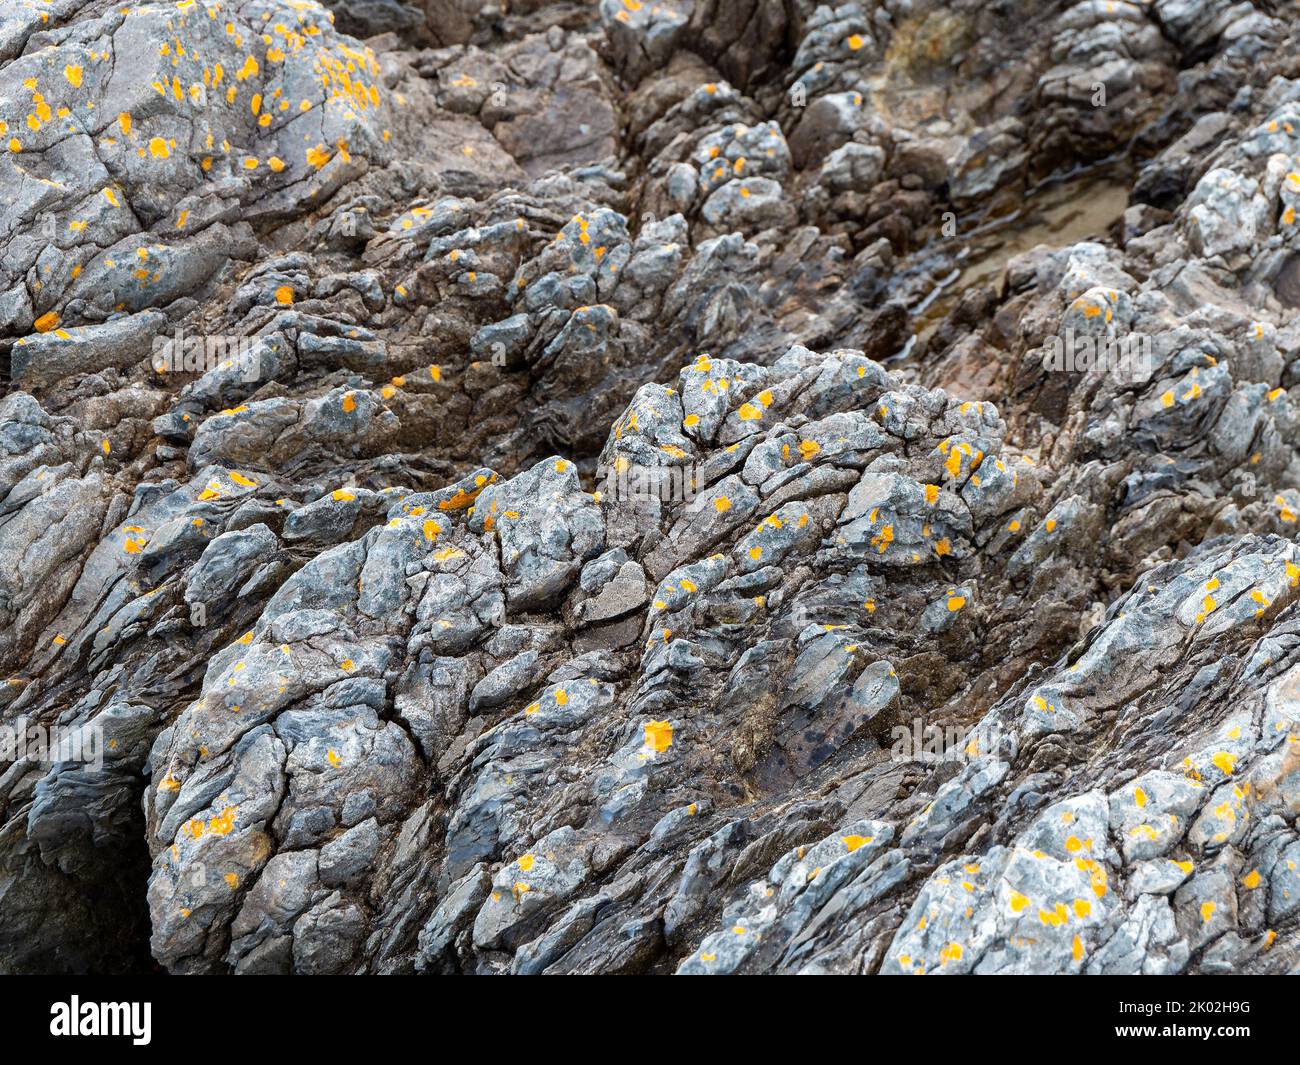 Beautiful rock. Stone layers close-up, full frame. Stone texture, rock formation. Stock Photo